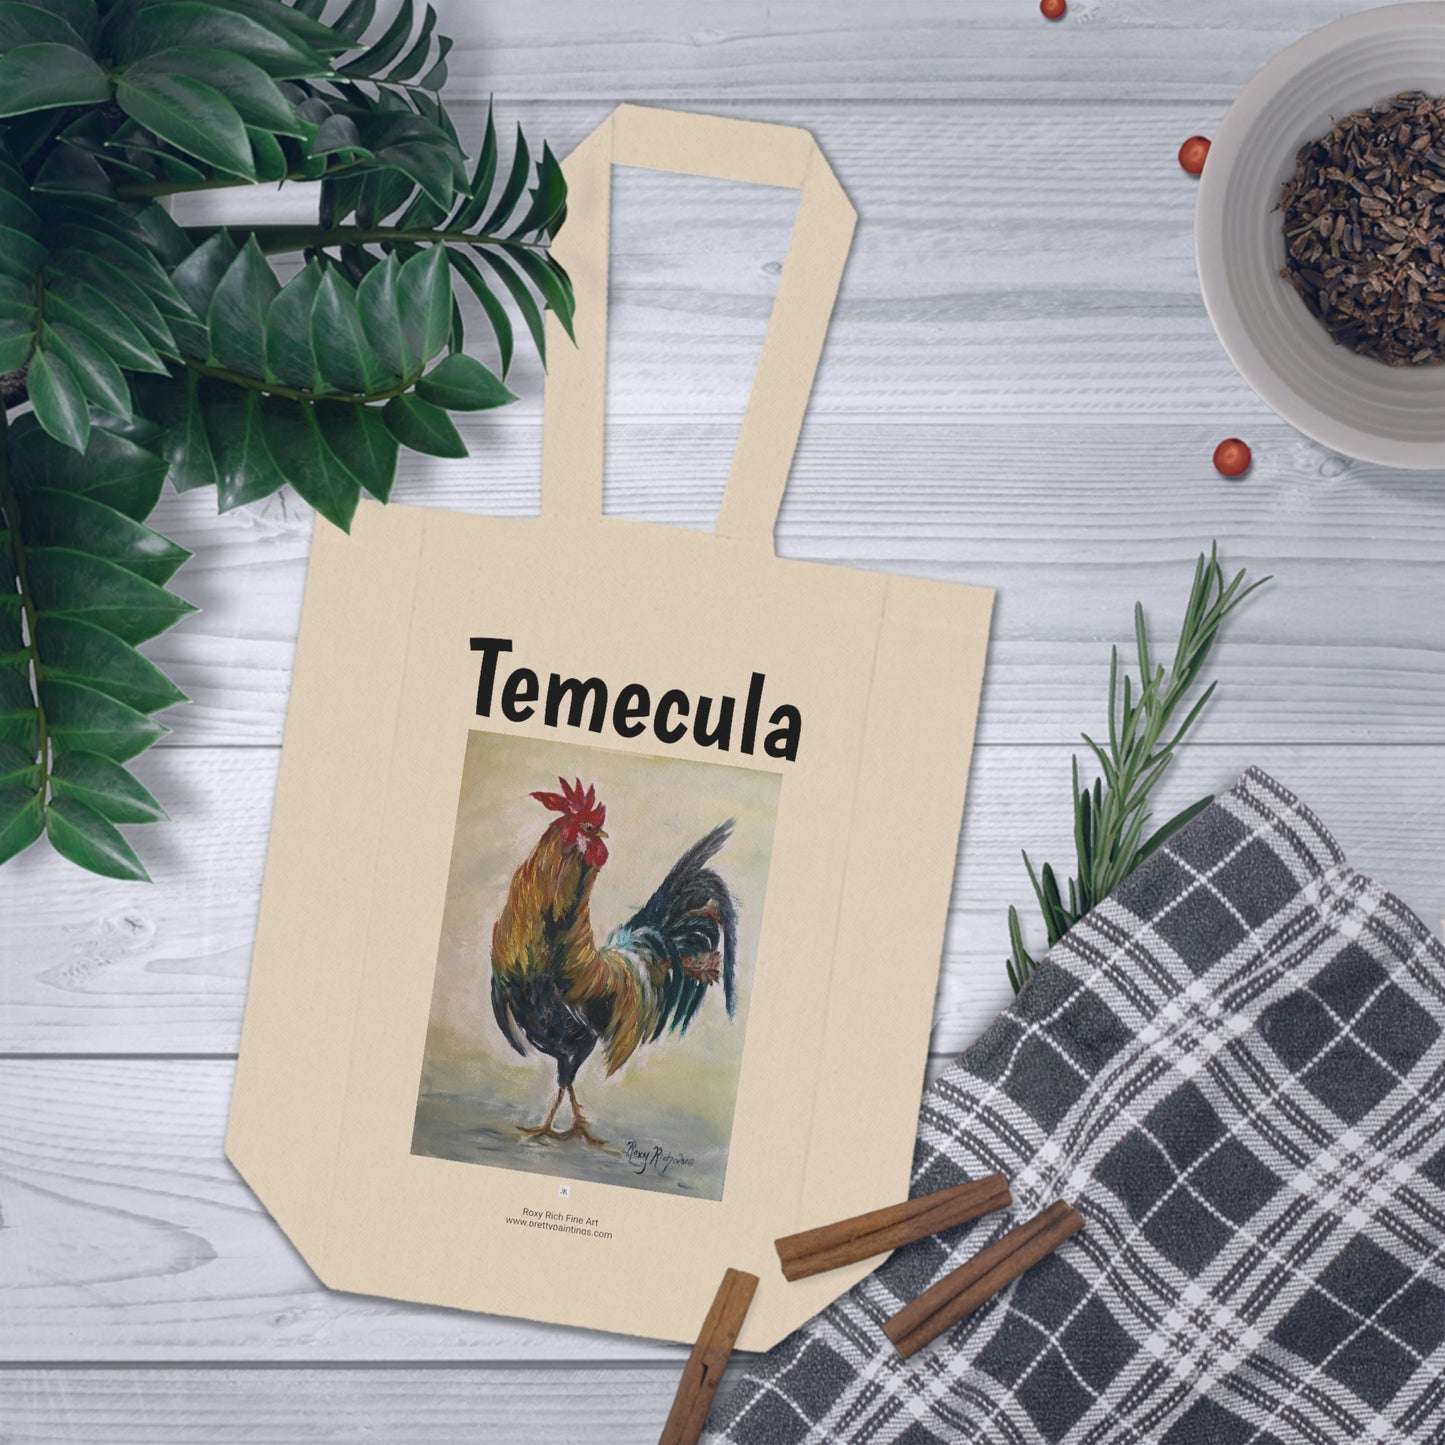 Temecula Double Wine Tote Bag featuring "Who you calling Chicken?" painting